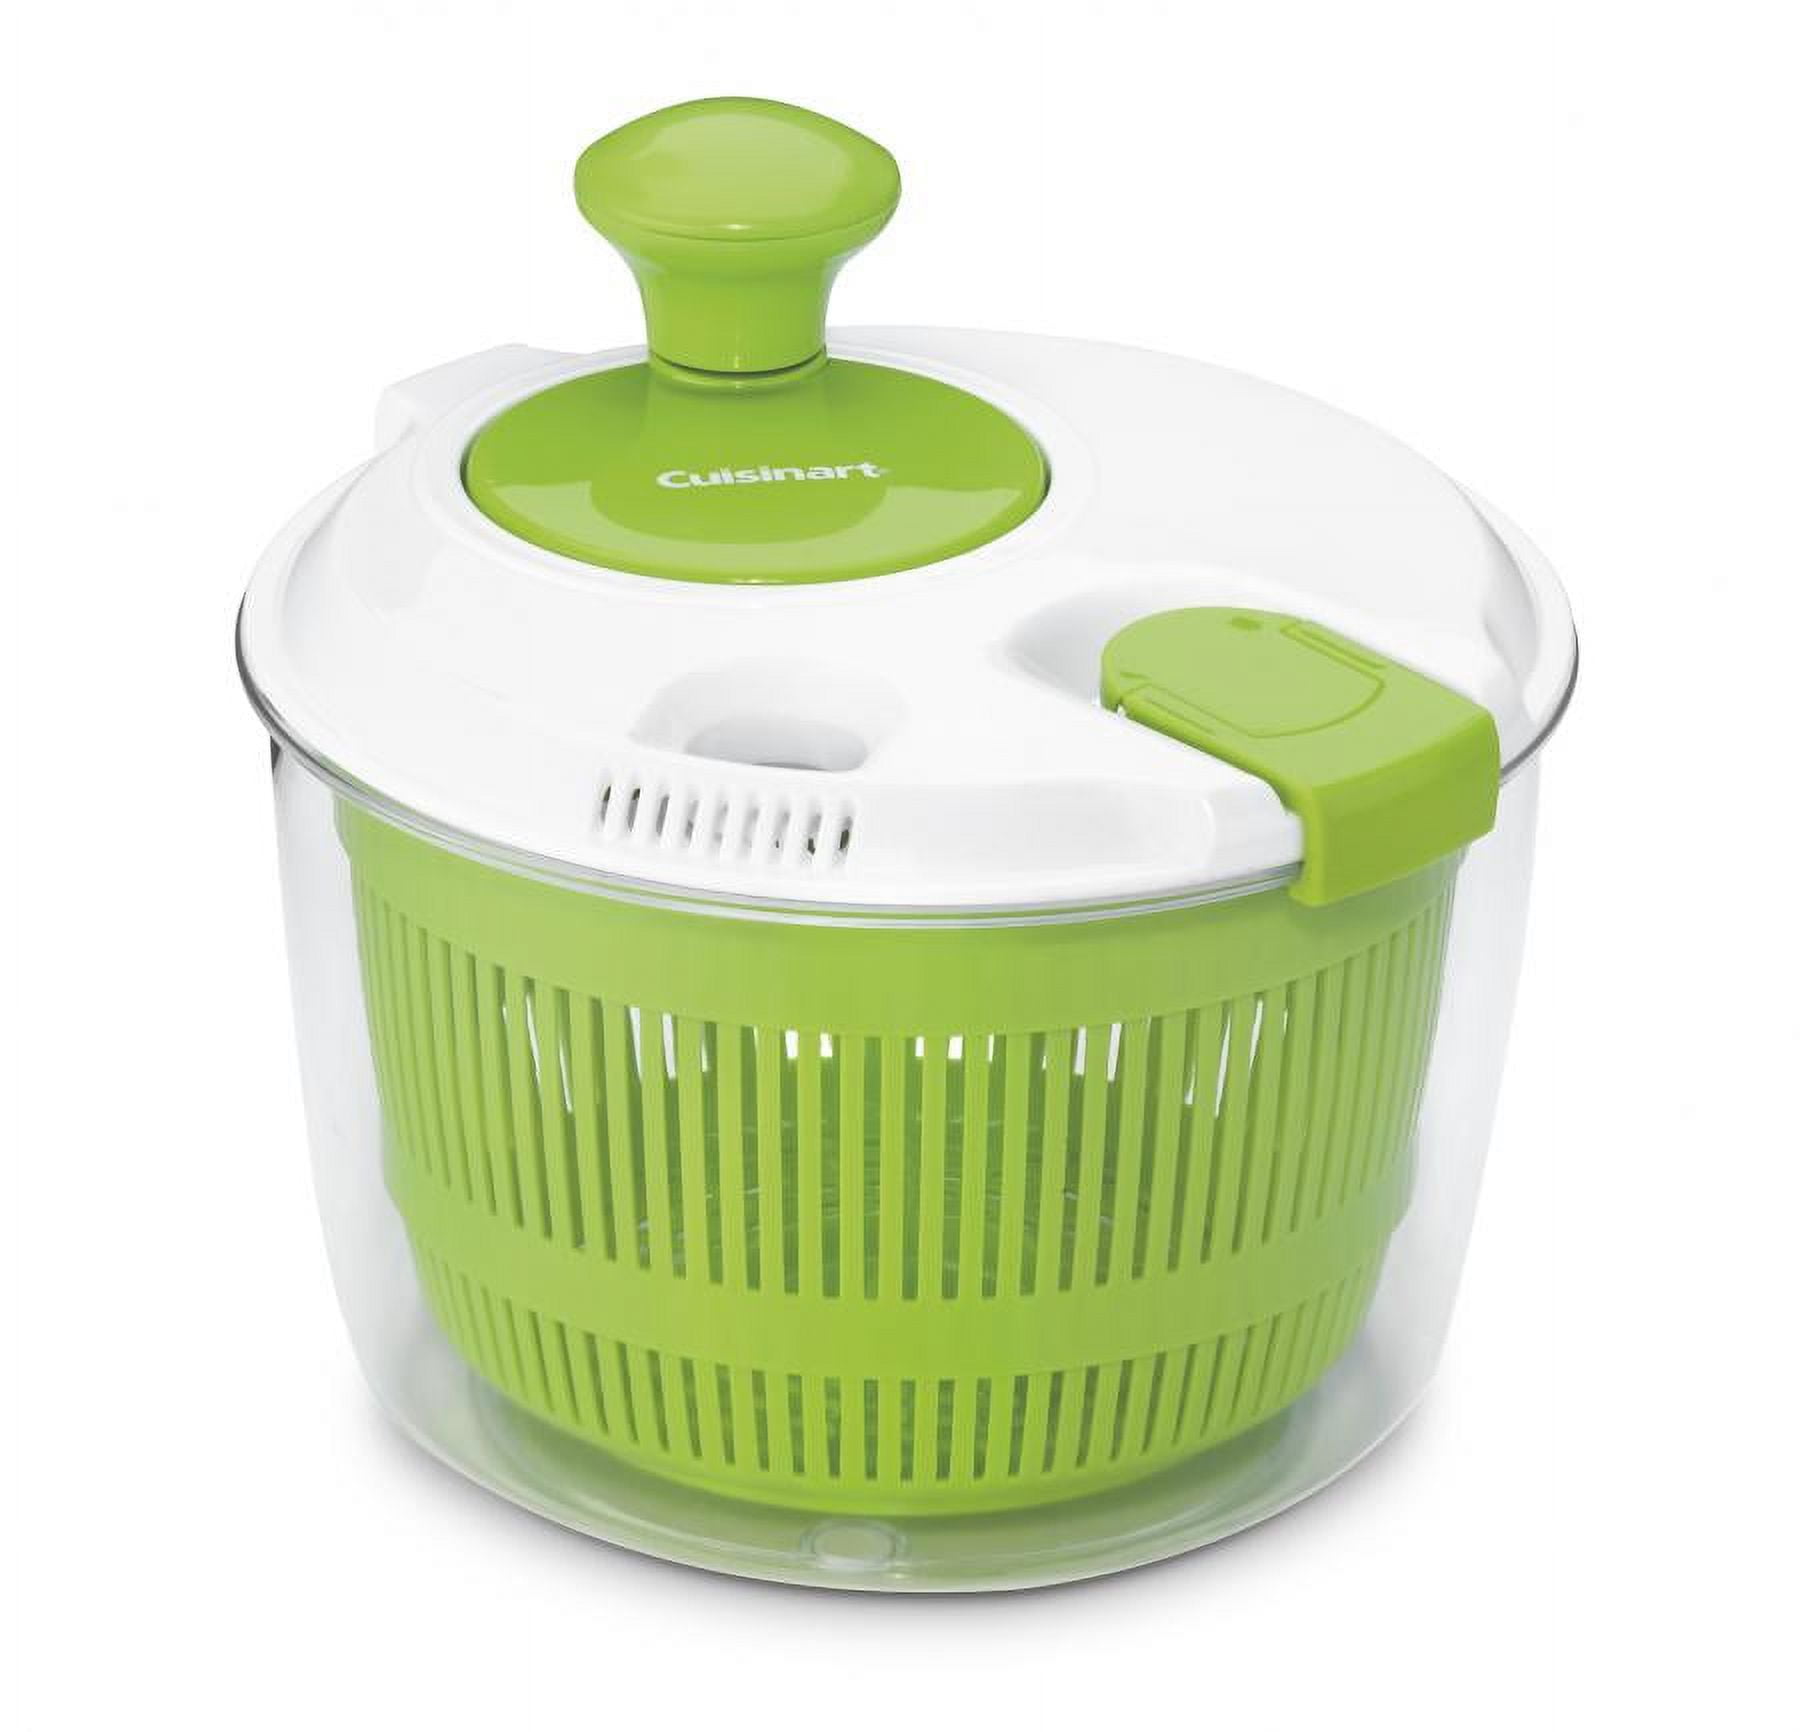 Score a $20+ Cuisinart 5-qt. Salad Spinner for holiday cooking at $13 Prime  shipped